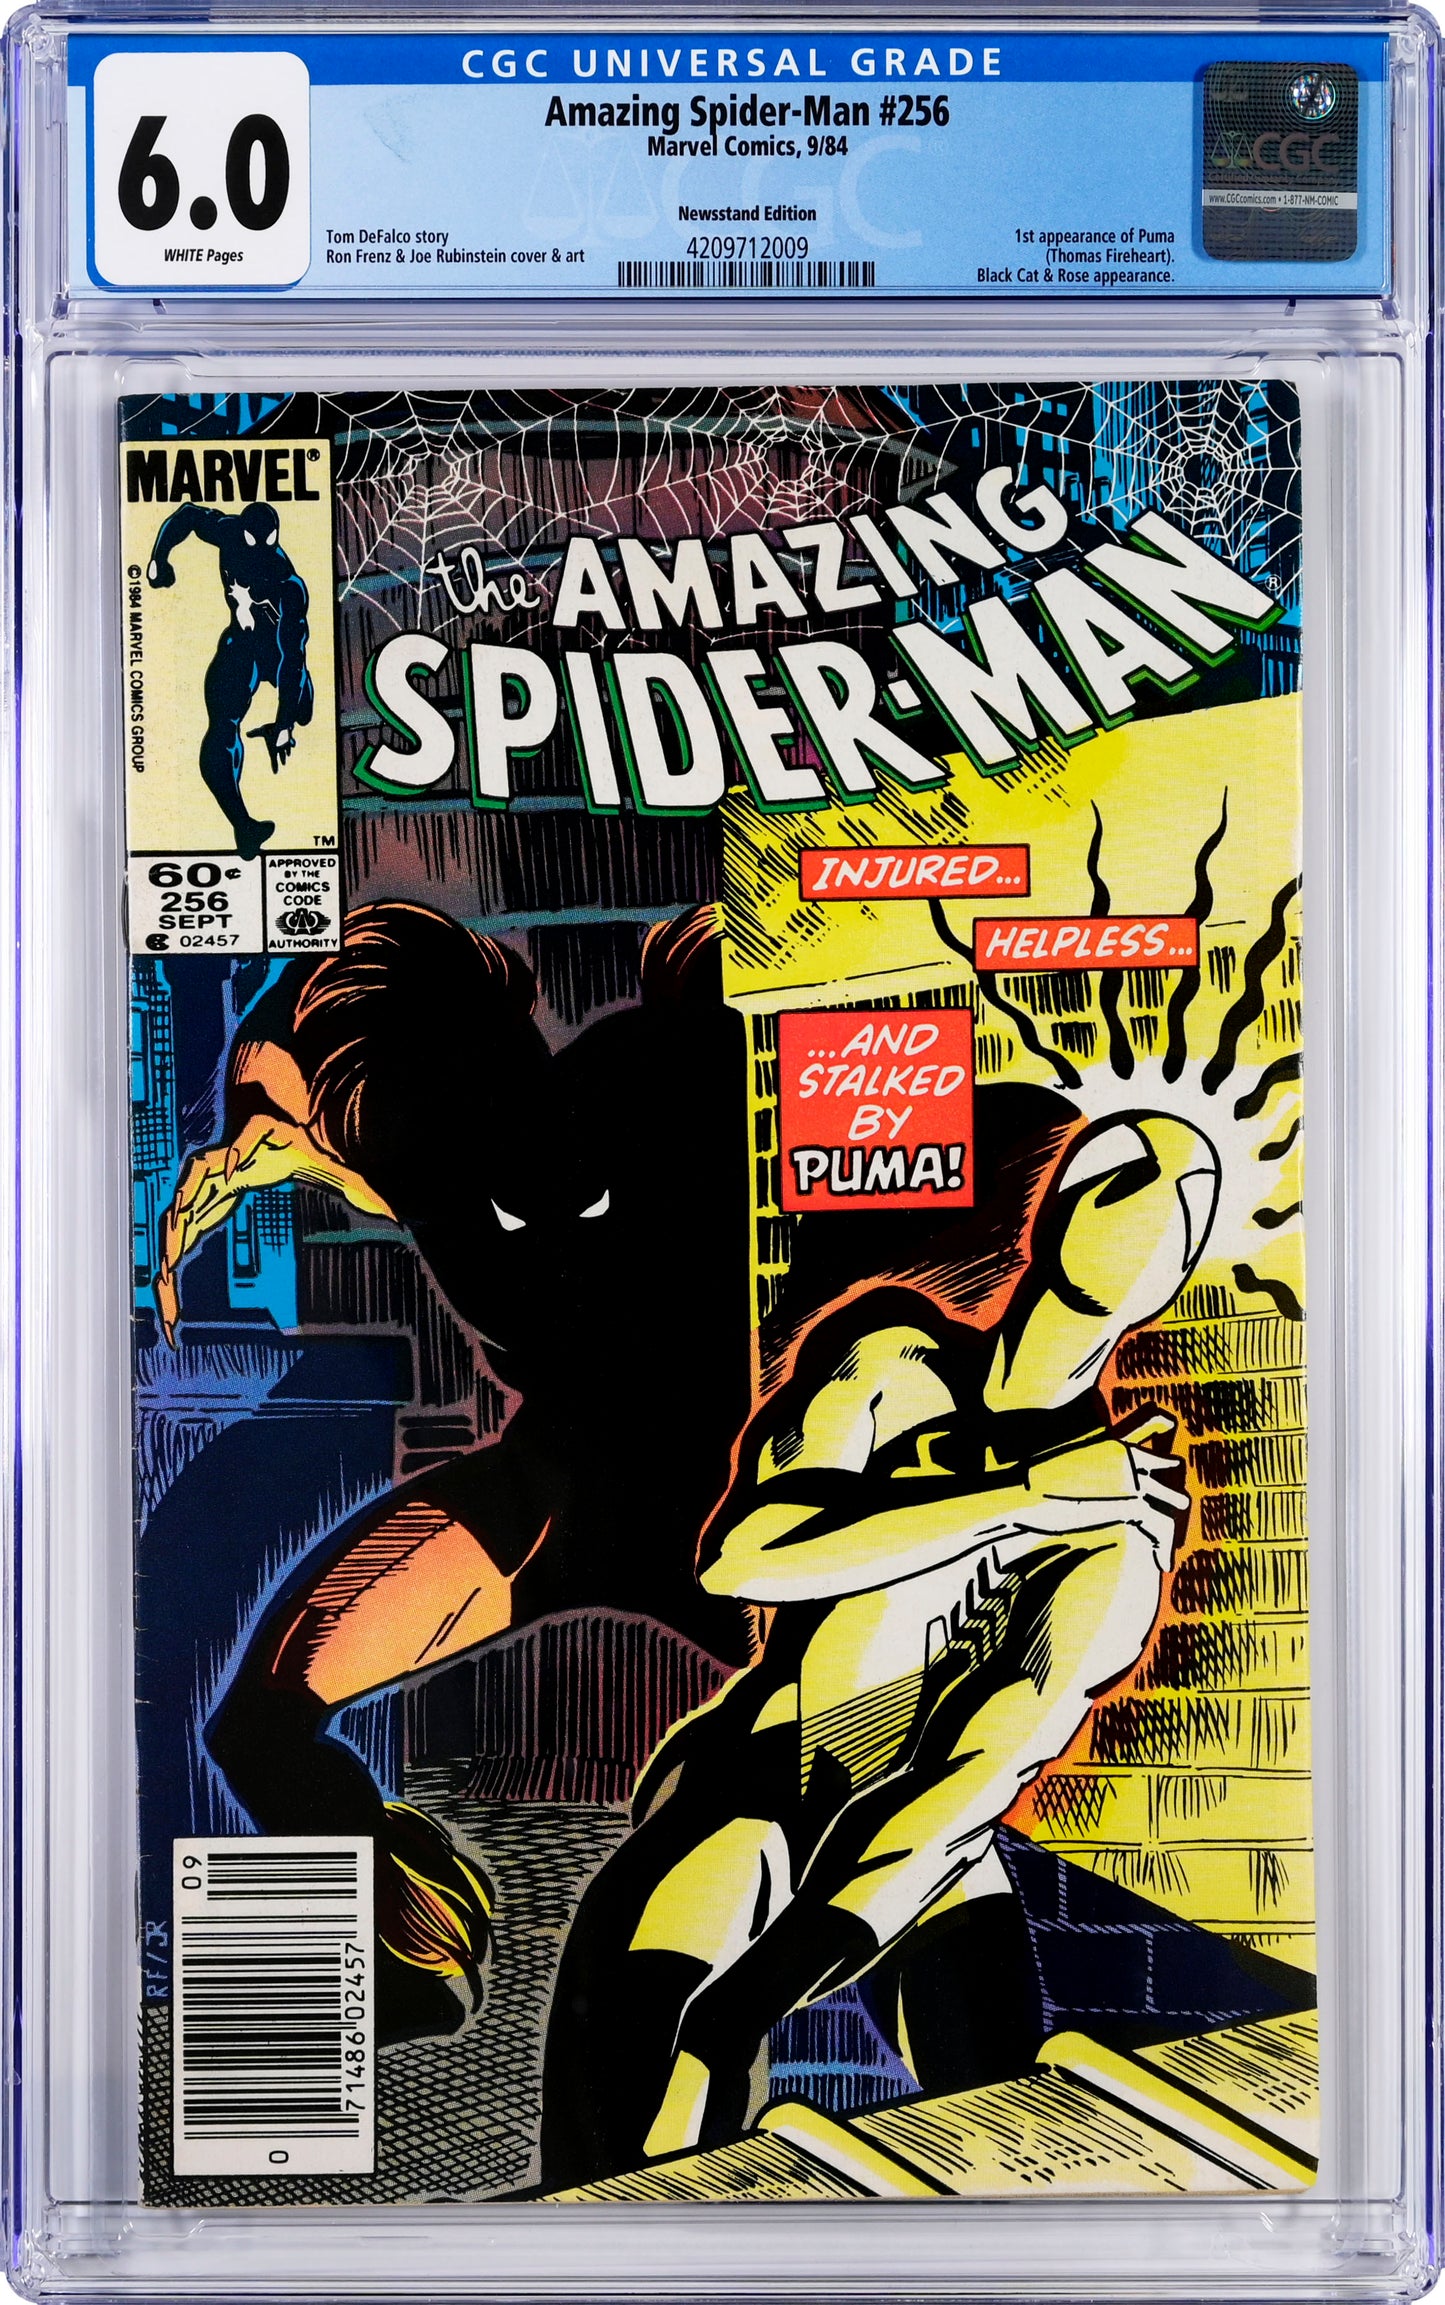 The Amazing Spider-Man #256 - CGC Graded 6.0 - 1st Appearance Puma